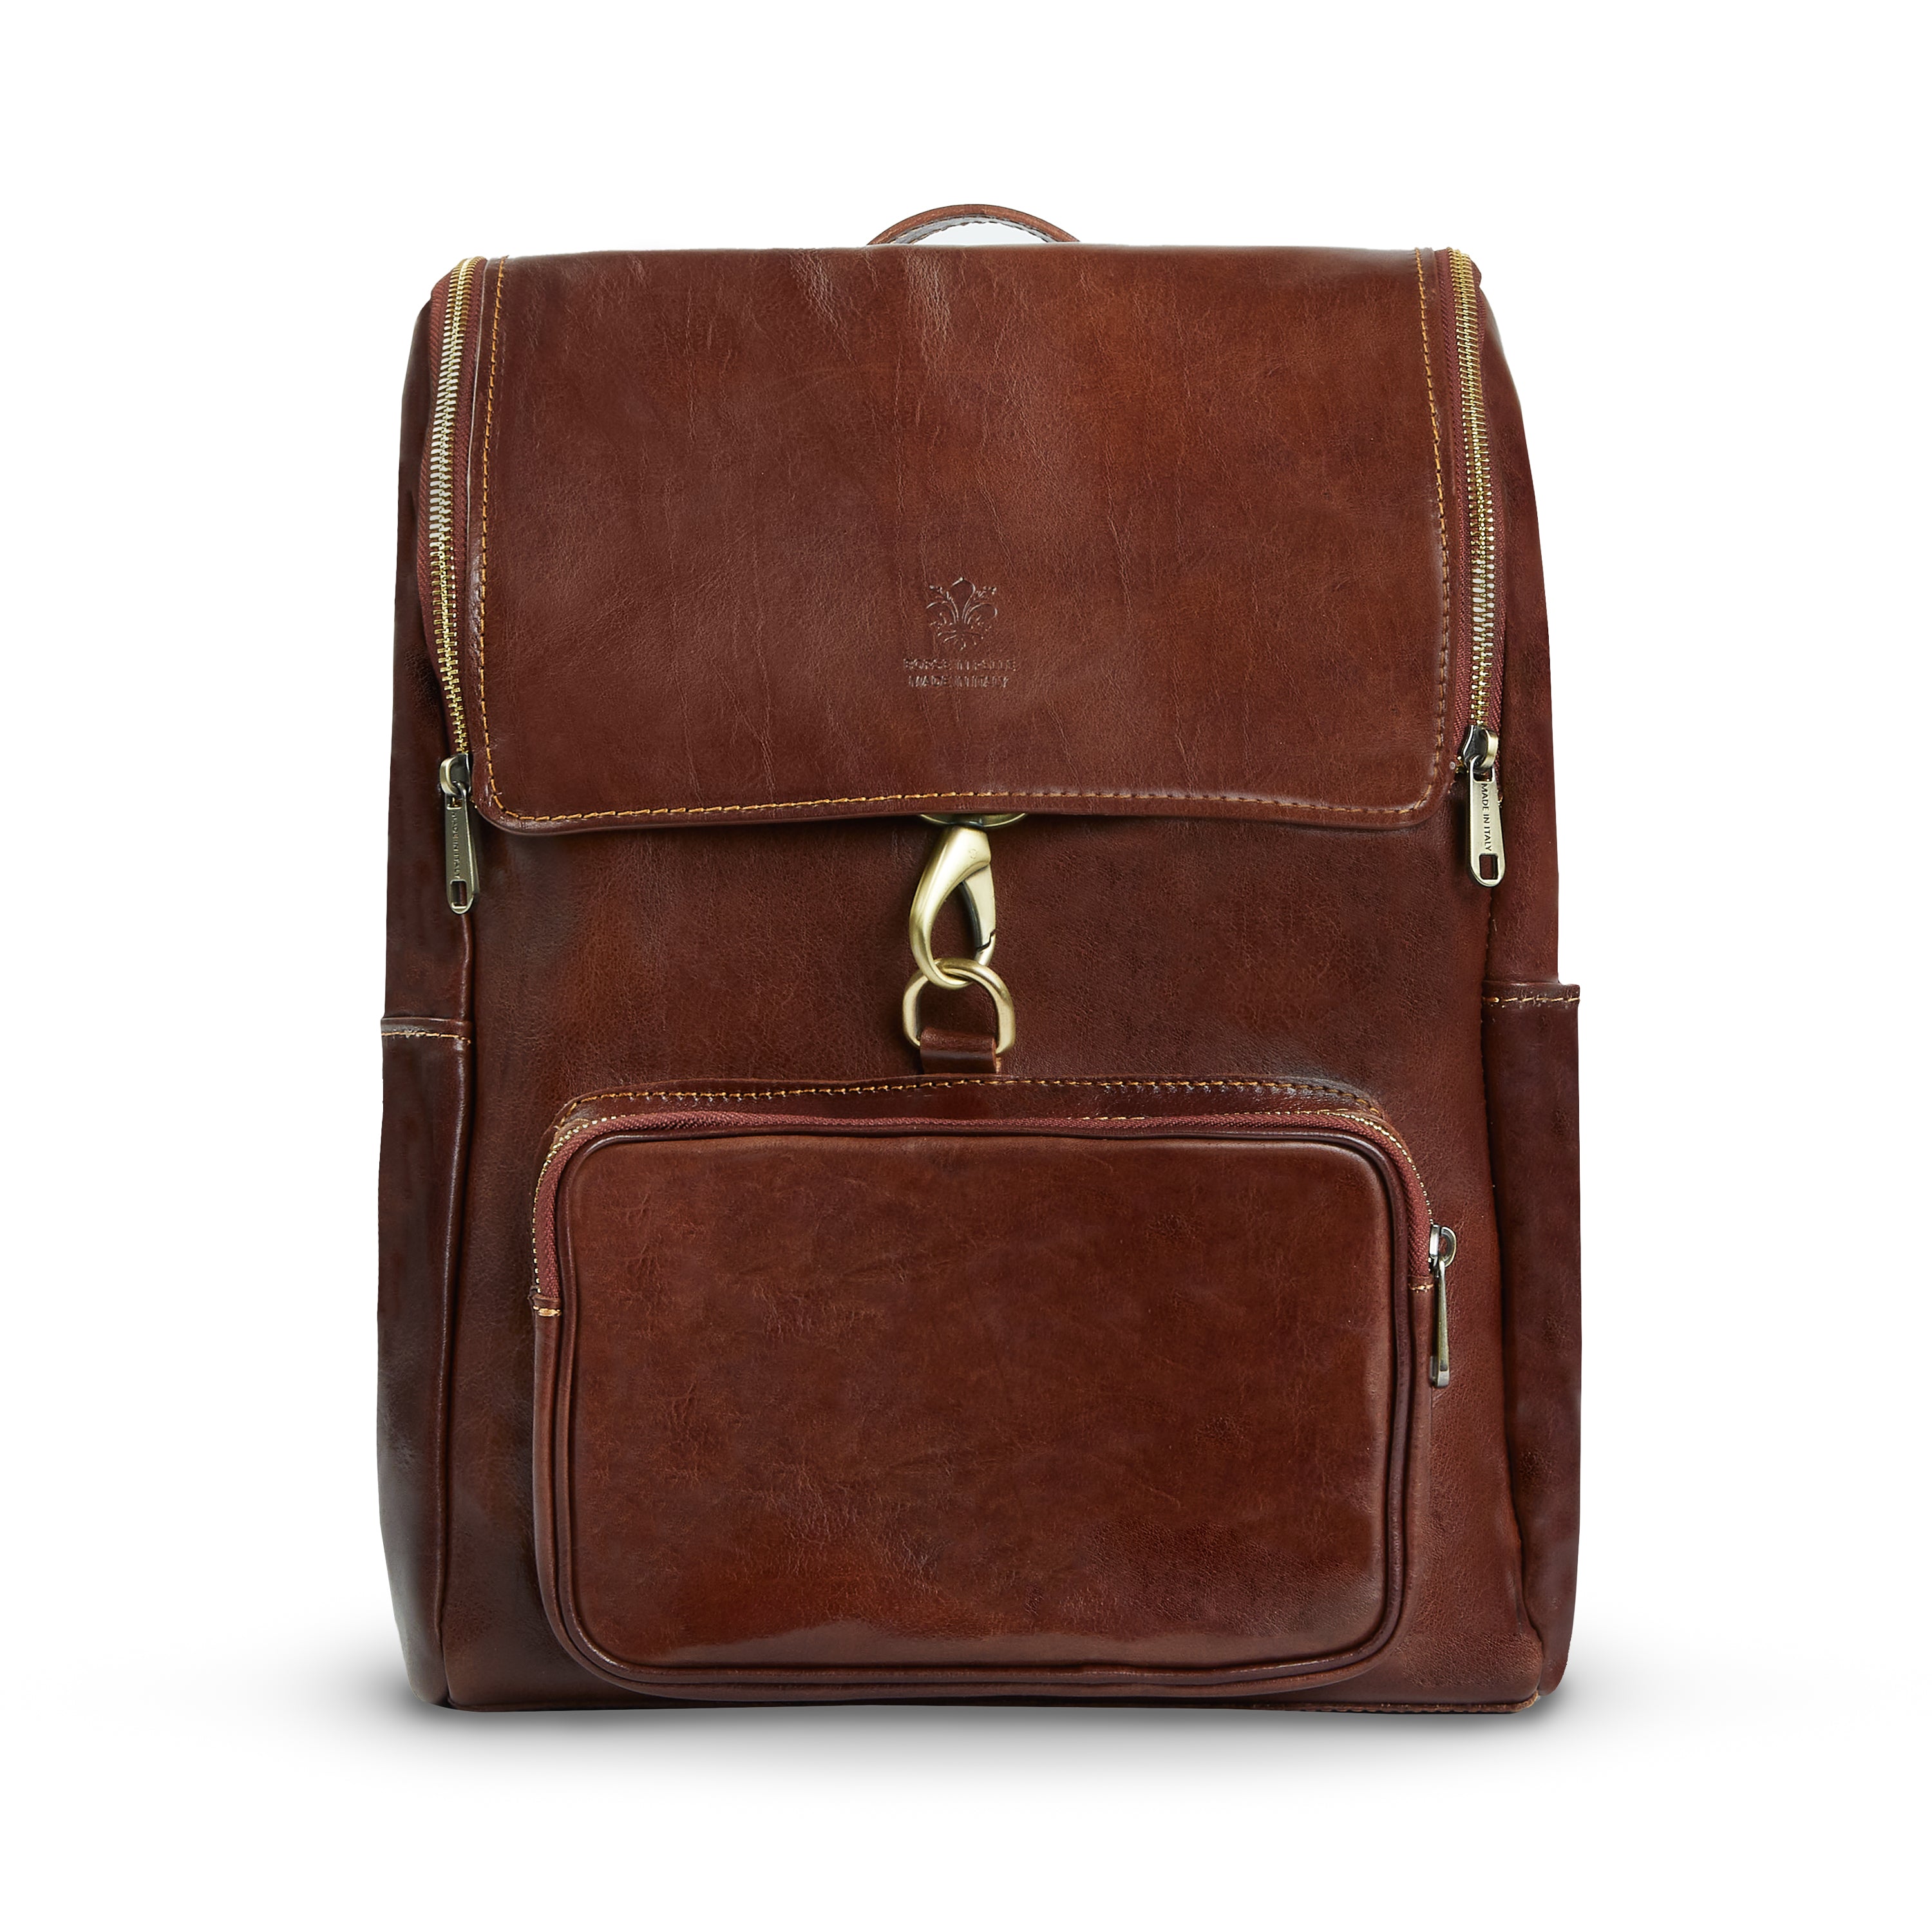 Burrows & Hare  Leather Backpack - Dark Tan